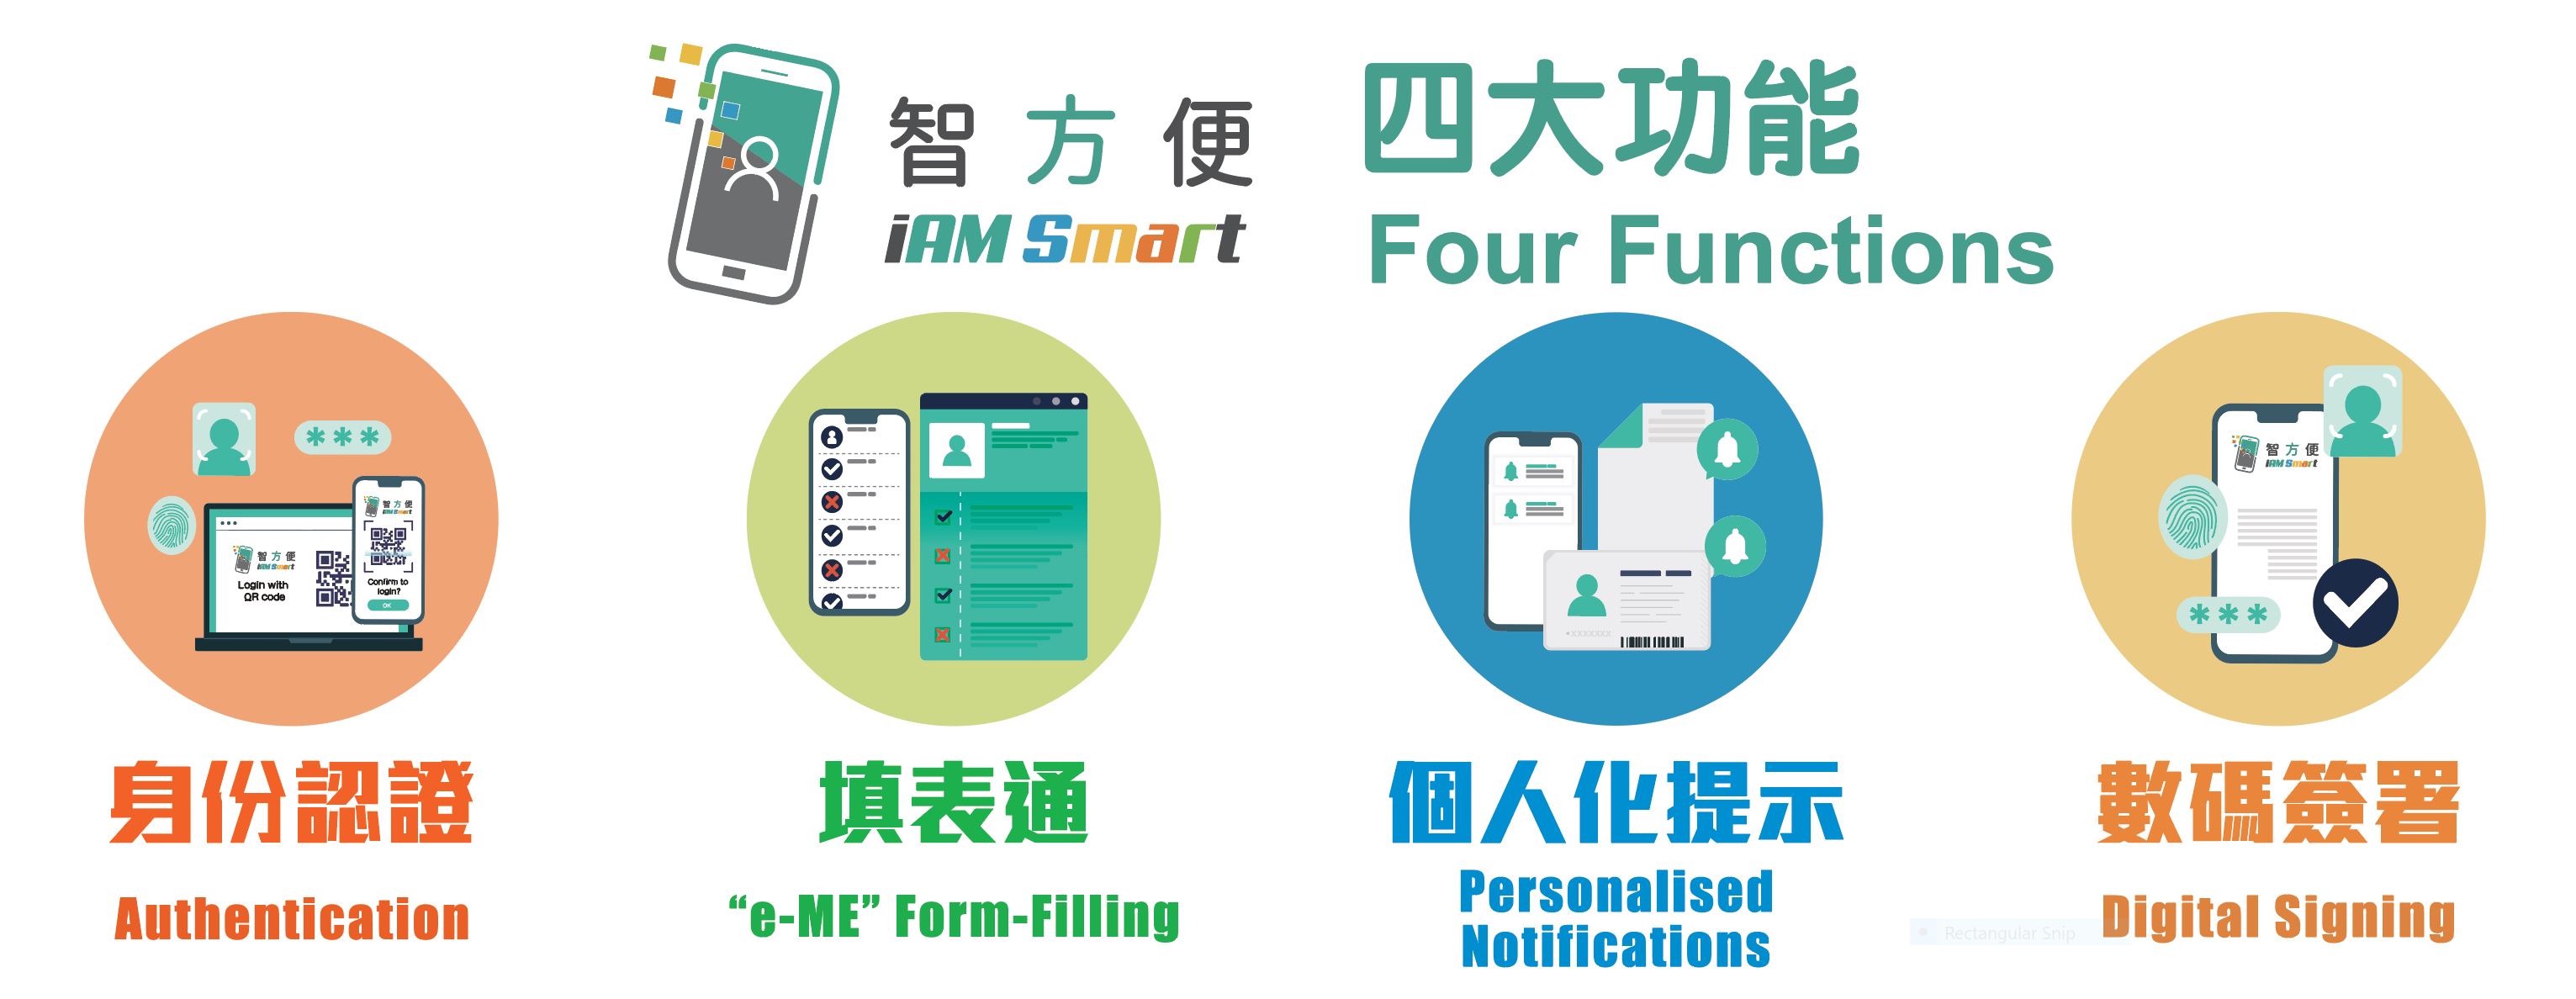 iAM Smart Four functions,
								1. Authentication.
								2. “e-ME” Form-Filling.
								3. Personalised Notifications.
								4. Digital Signing.